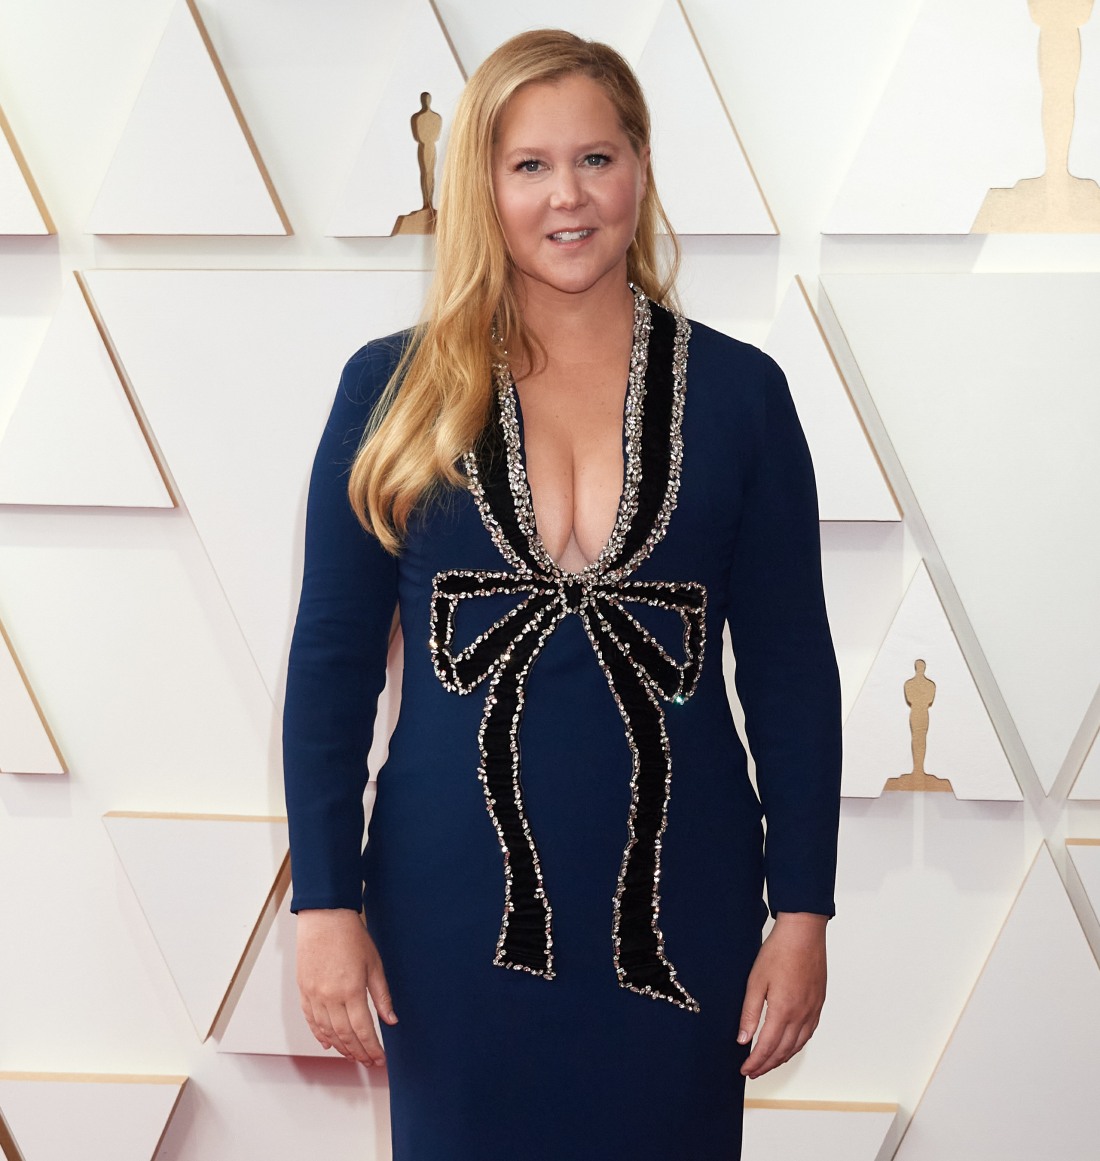 Amy Schumer says the Oscars slap 'says so much about toxic masculinity...